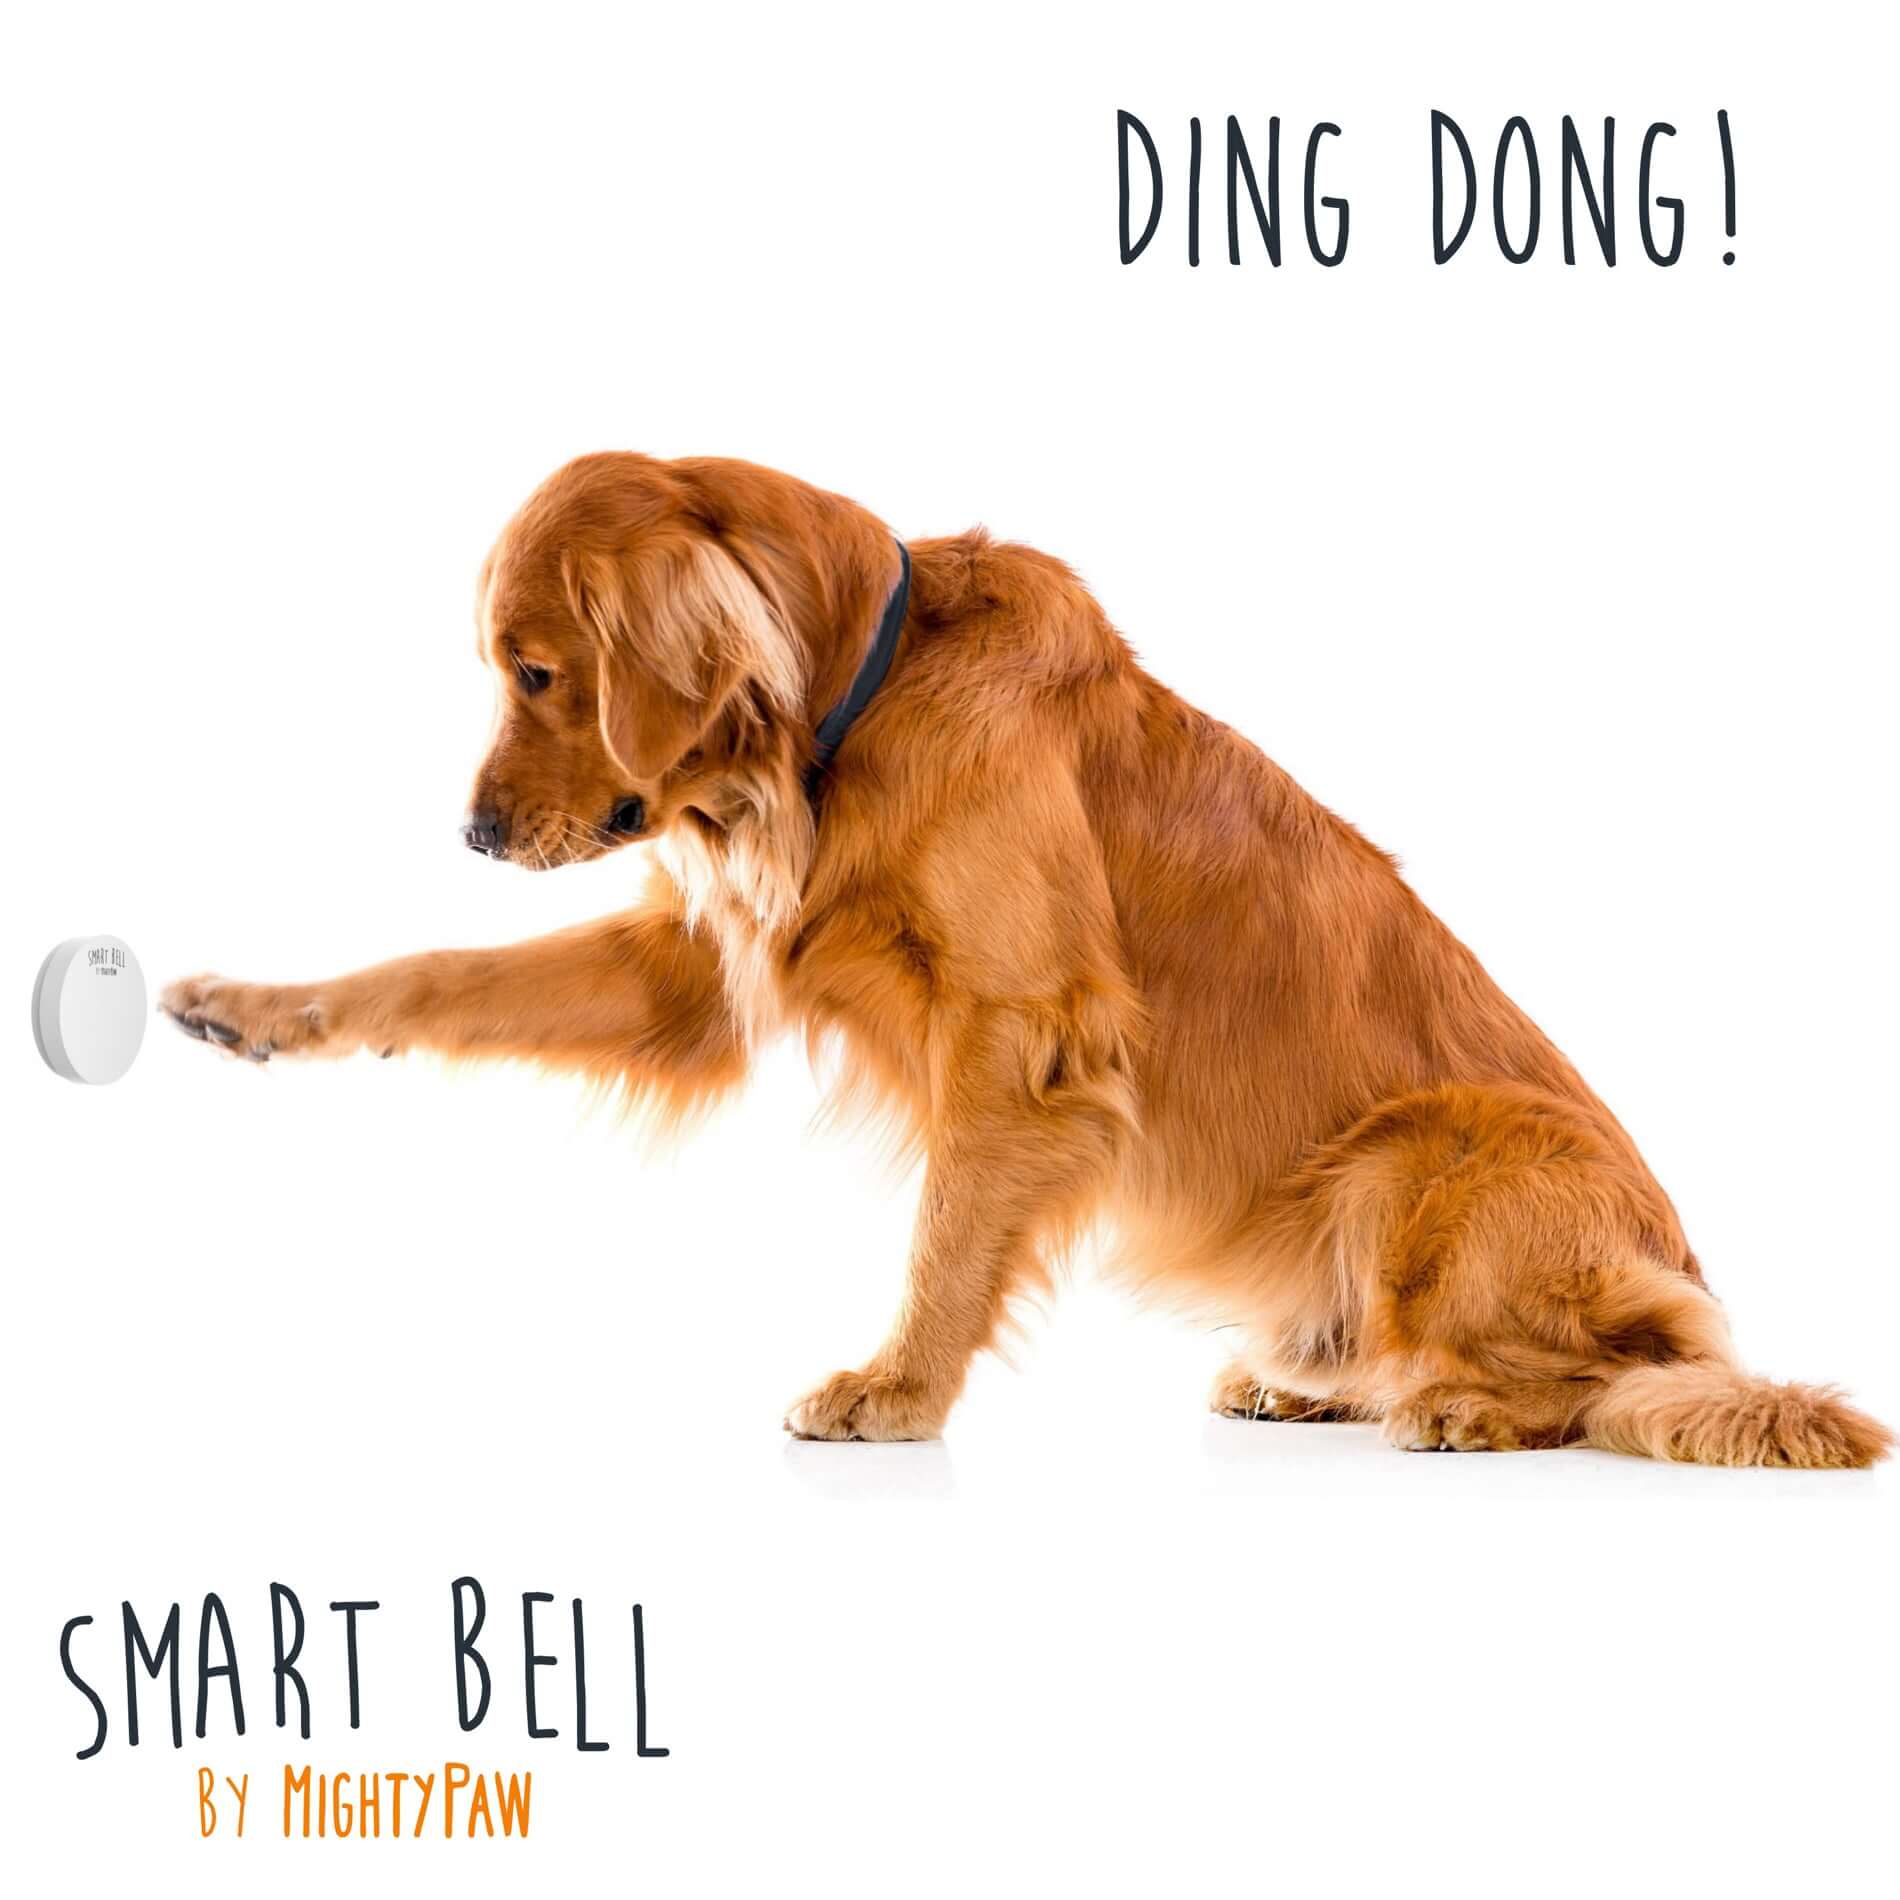 Mighty Paw Smart Bell 2.0: Potty Training Made Simple